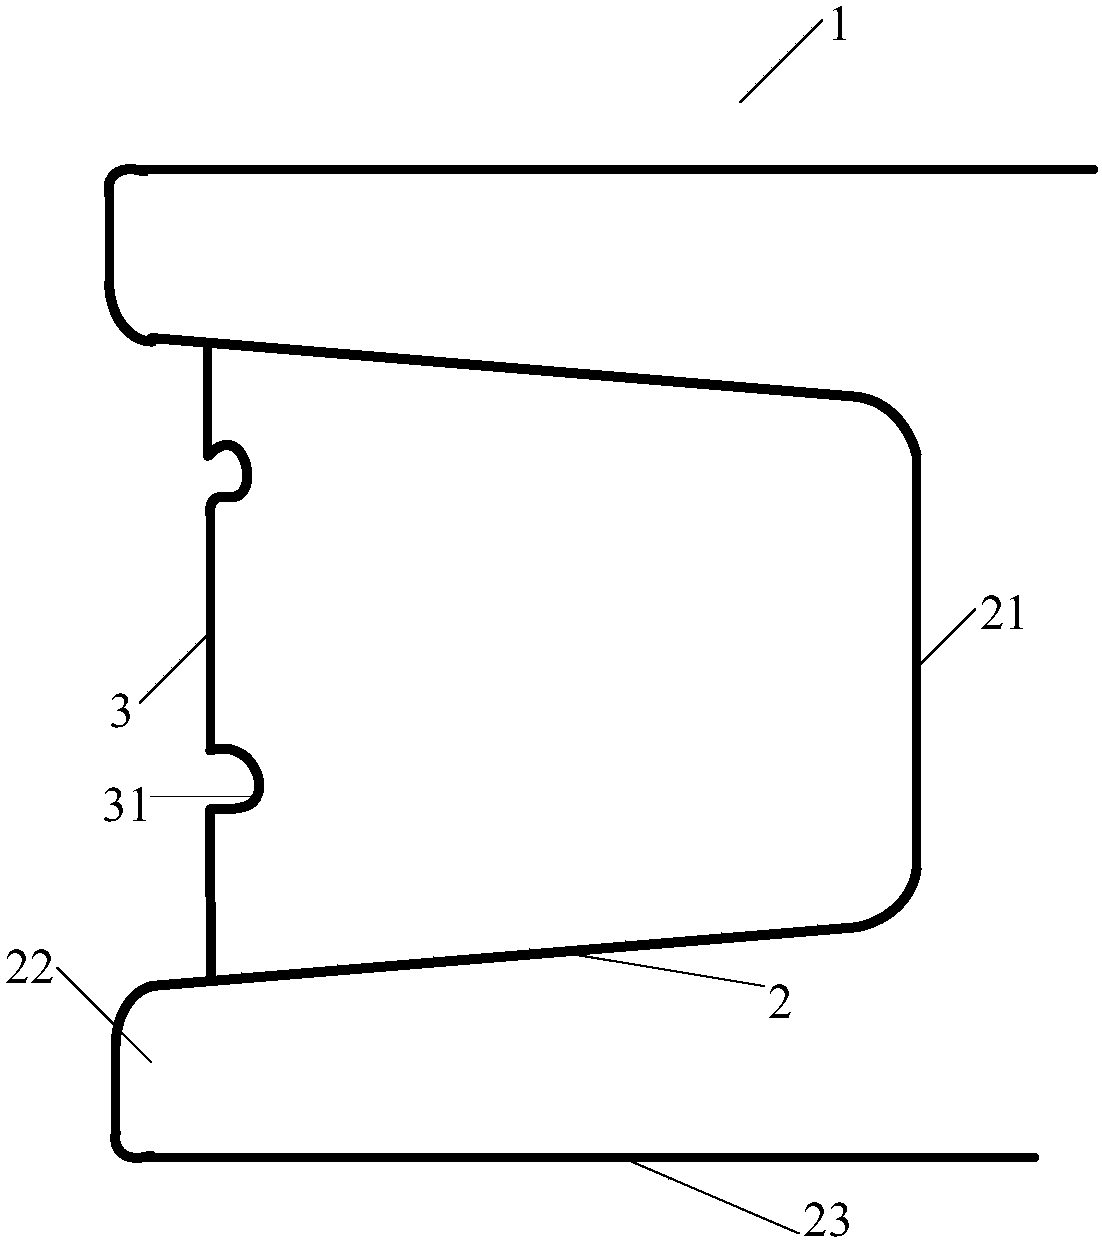 Method for assessing loss state of electrical equipment